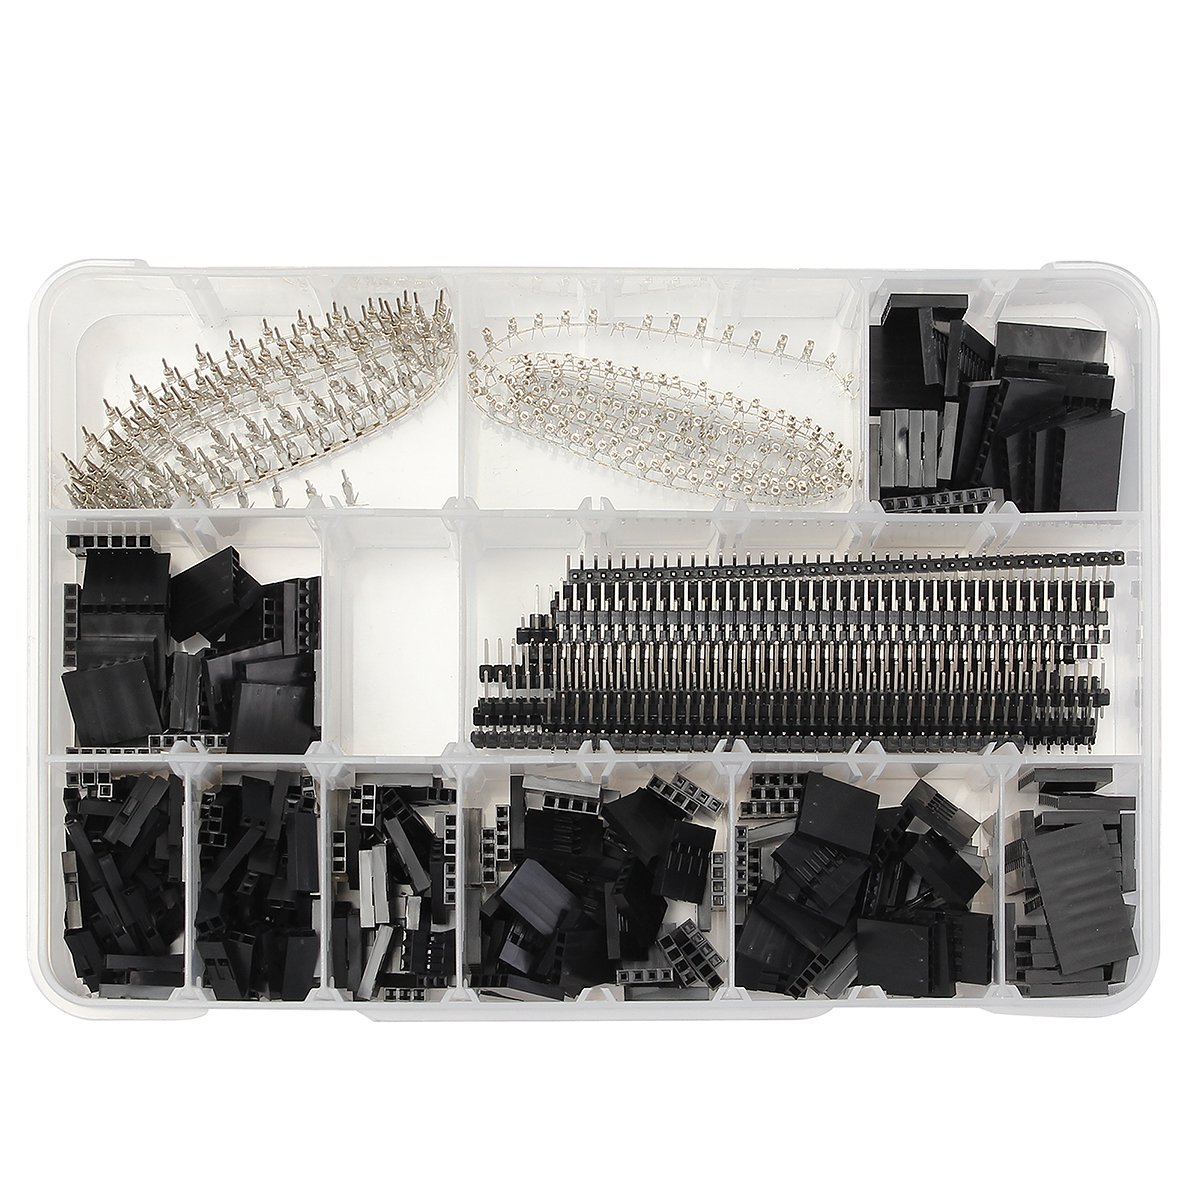 Geekcreit® 1450pcs 2.54mm Male Female Dupont Wire Jumper With Pin Header Connector Housing Kit 1